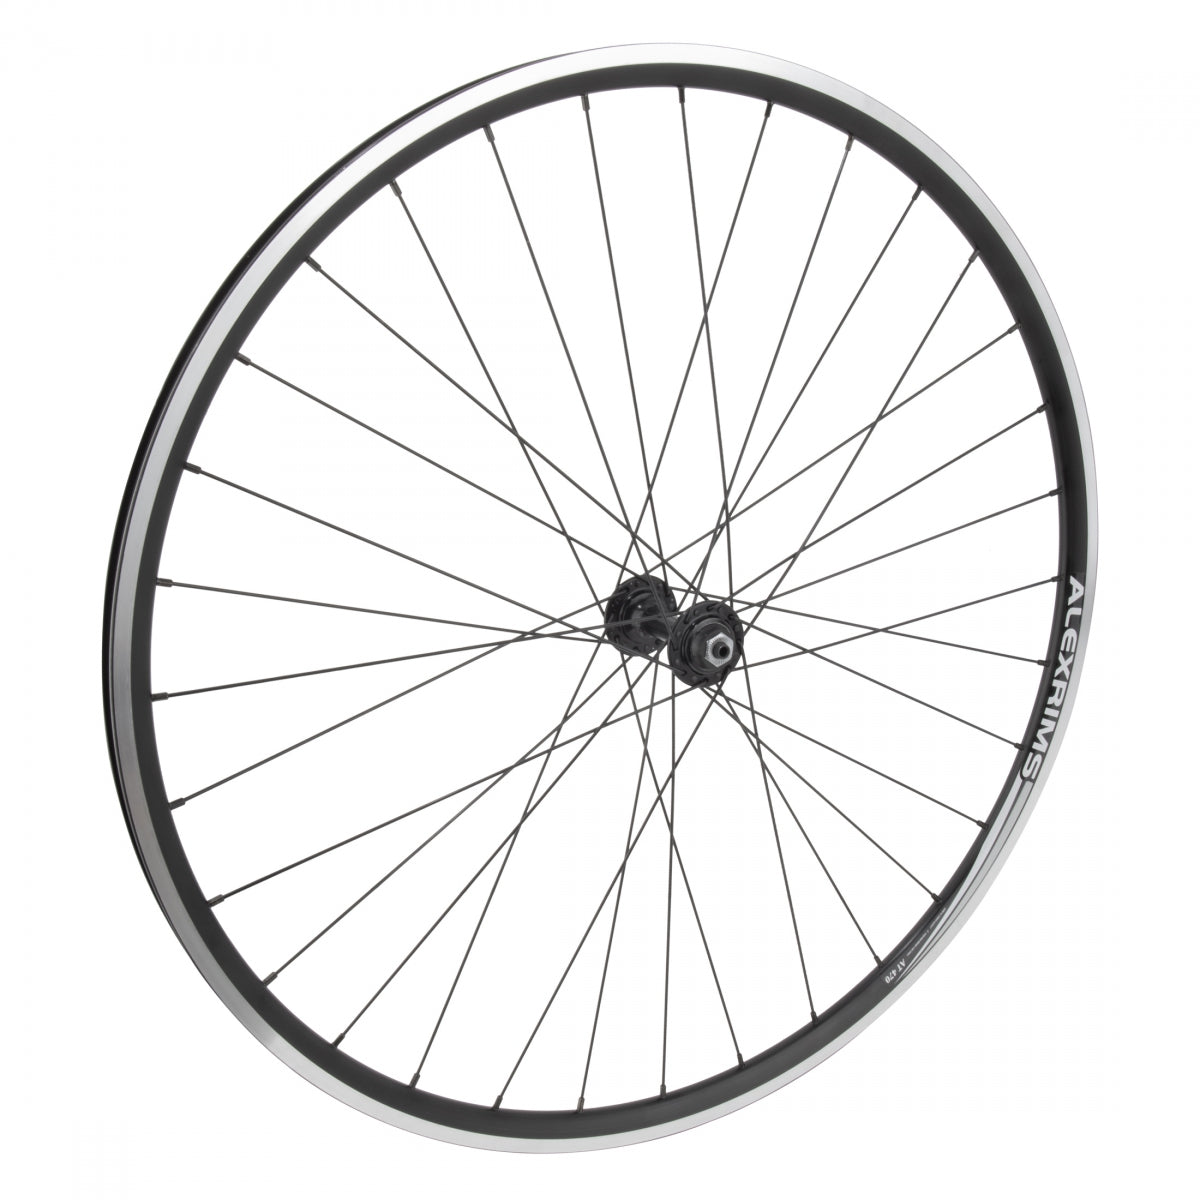 Wheel Front 700 622X17 Alex At470 Black Msw Tubeless 32 Wm Rd1000 Quick Release 100Mm Ss2.0Bk